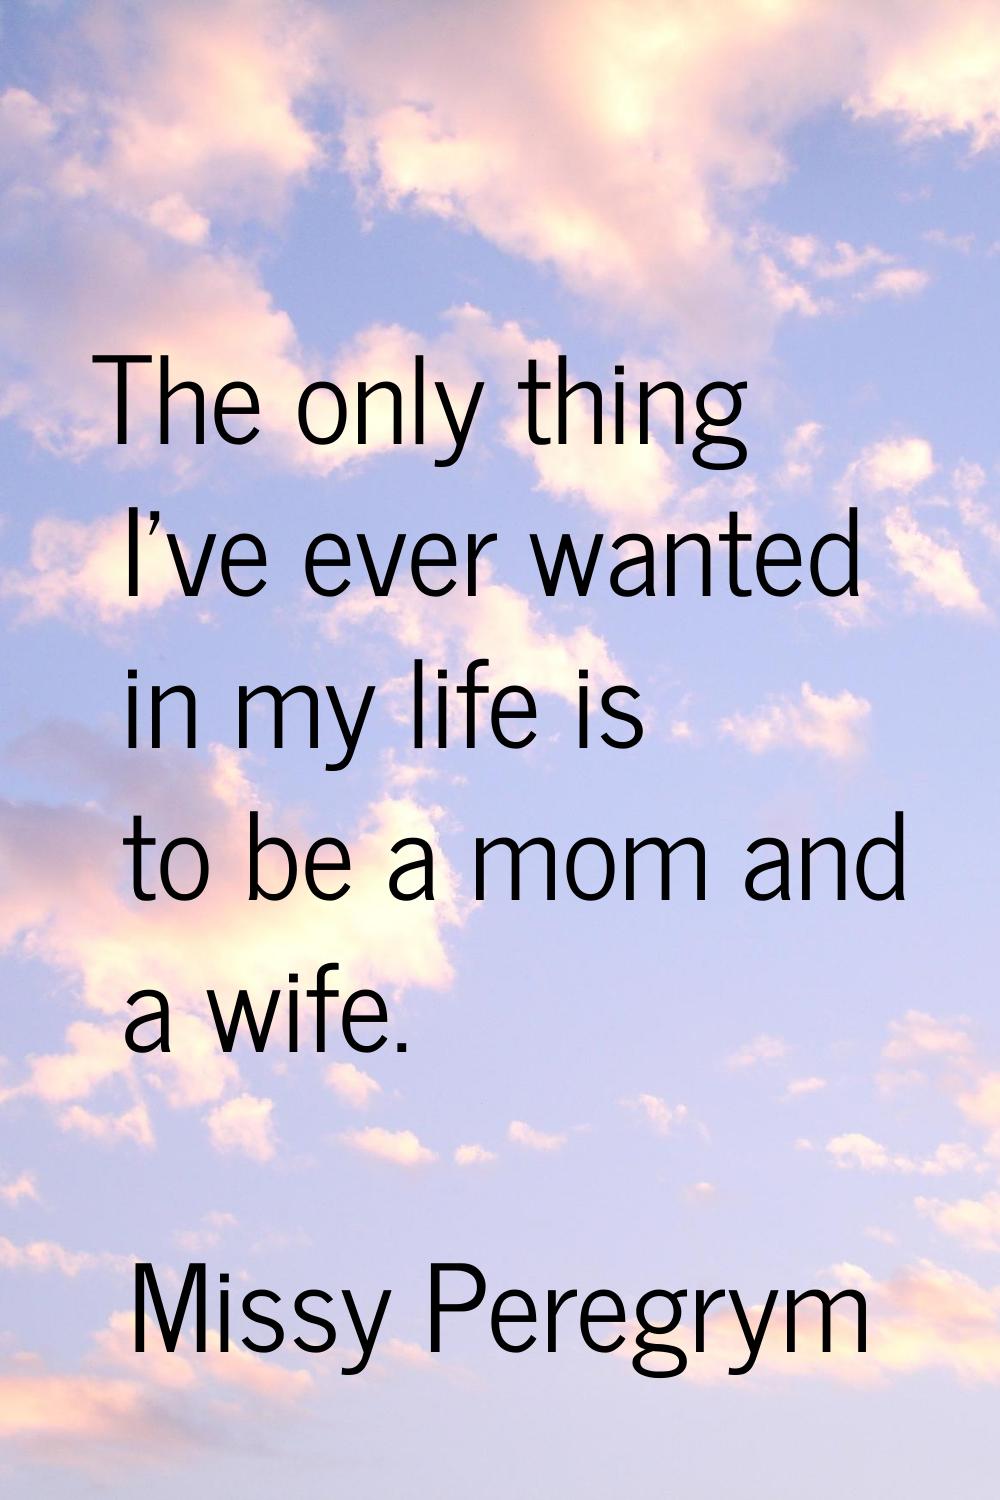 The only thing I've ever wanted in my life is to be a mom and a wife.